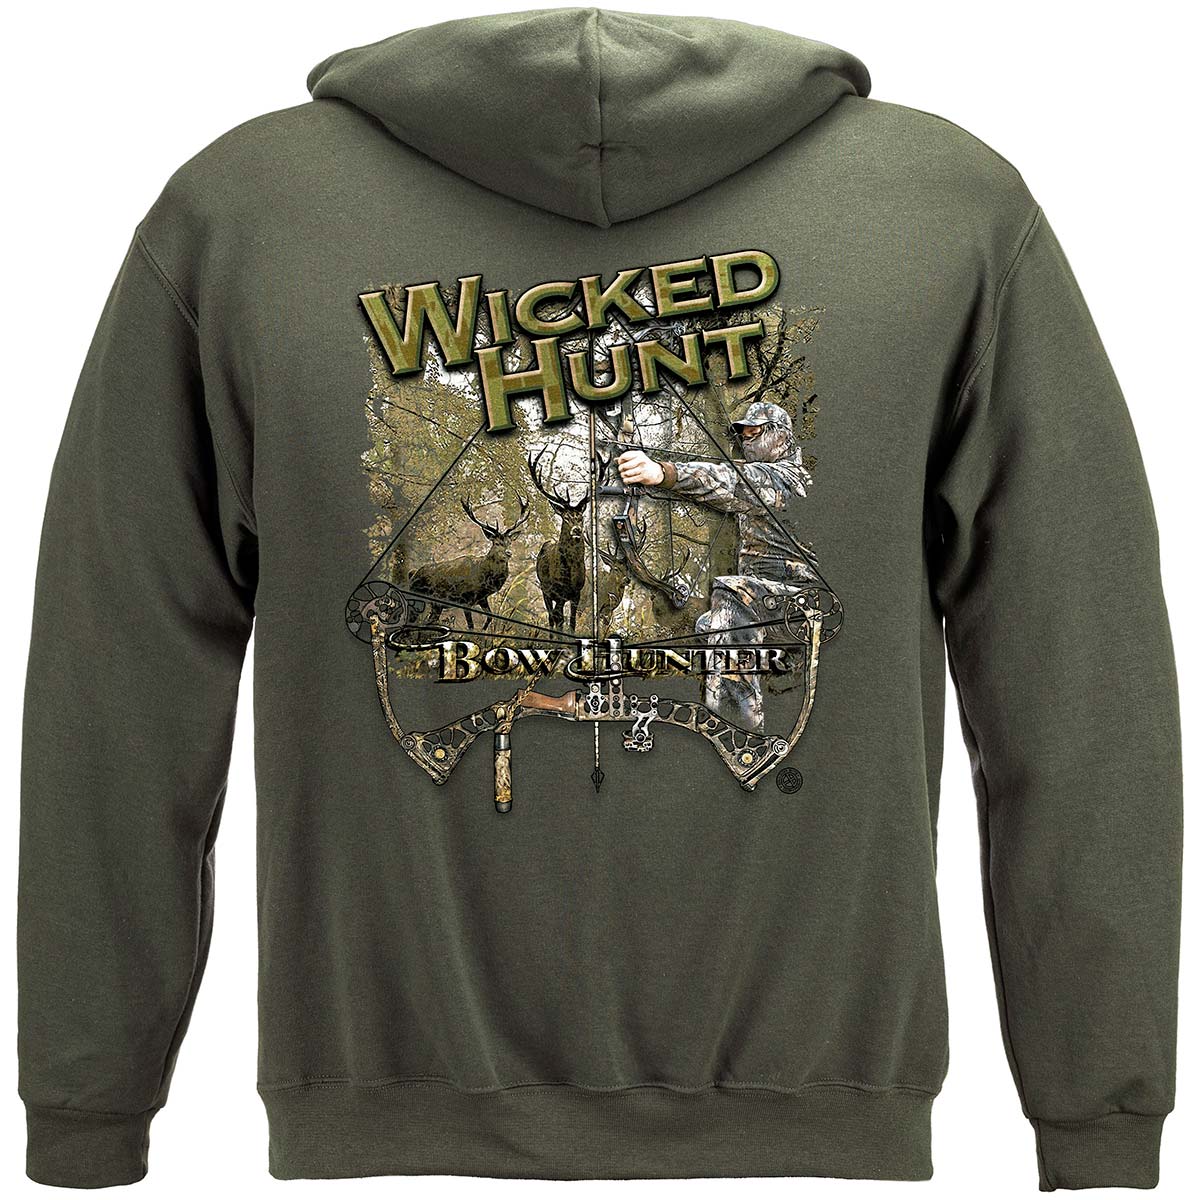 Wicked Hunt Bow Hunting Premium T-Shirt